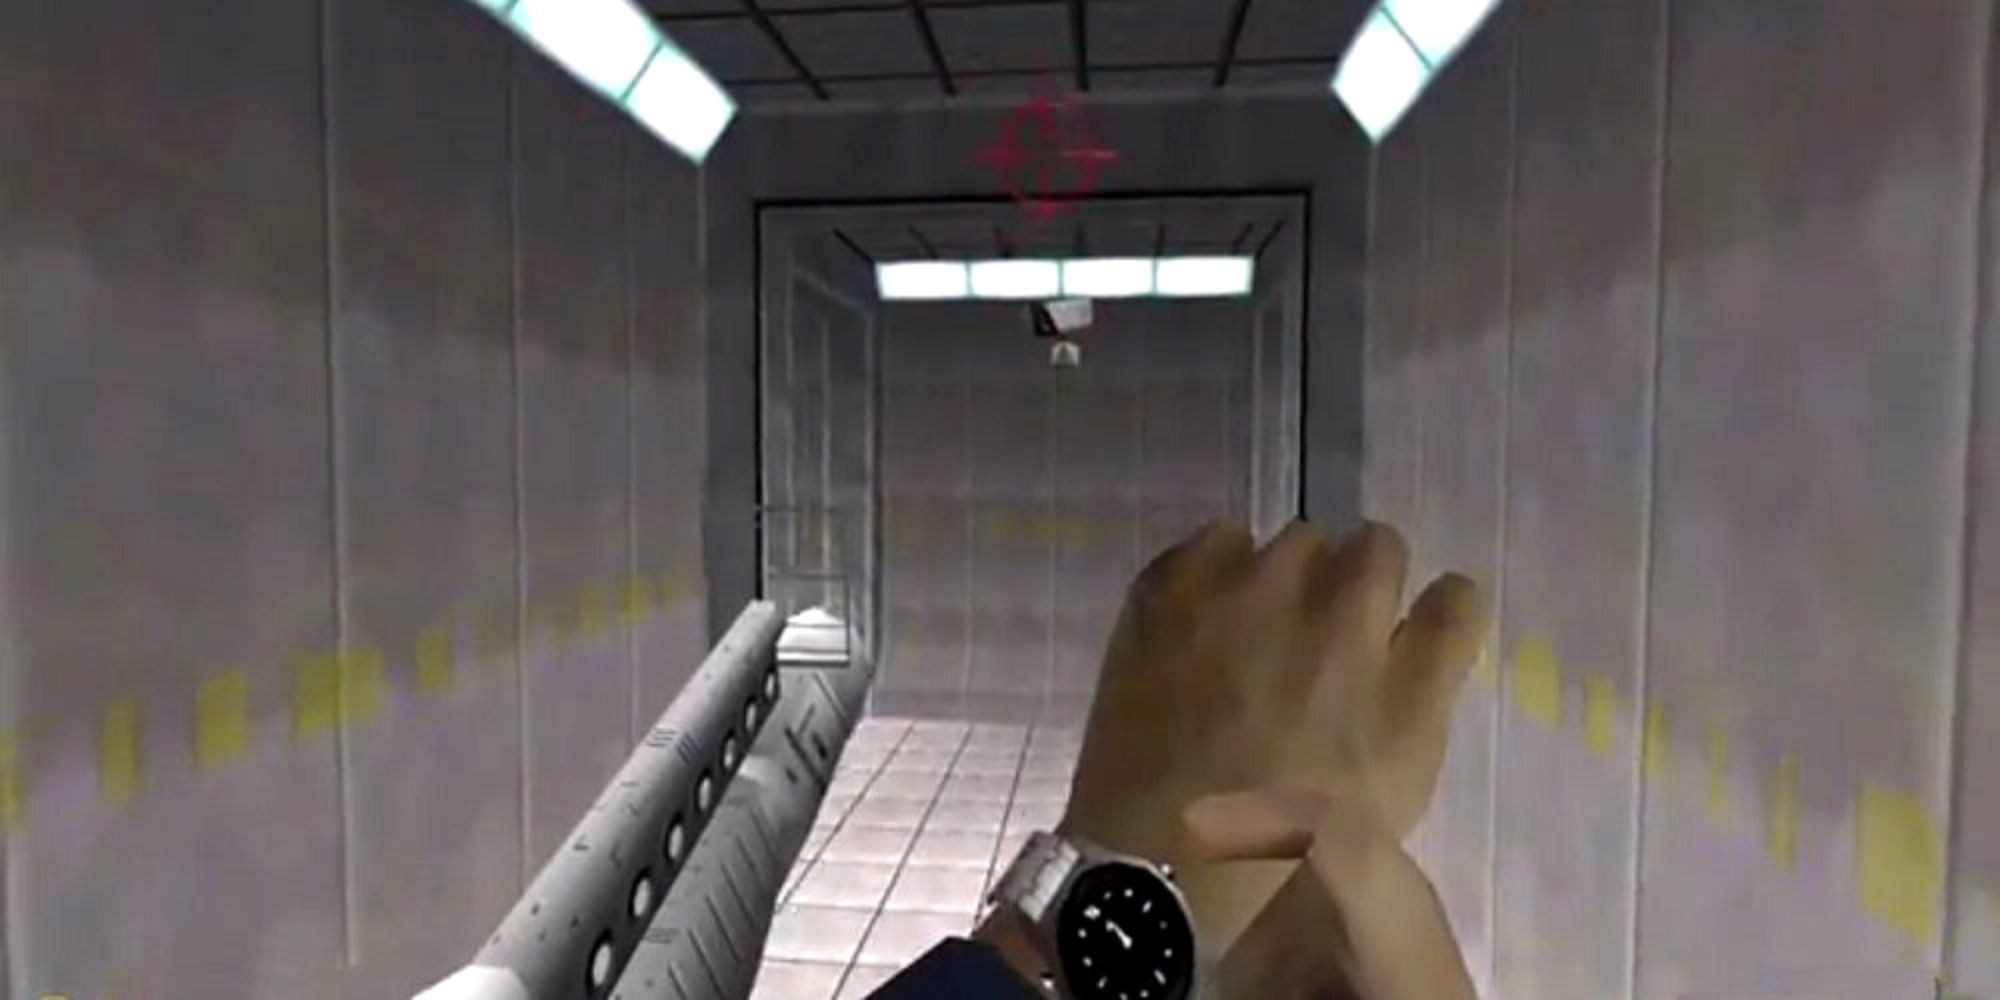 James Bond's watch about to shoot a security camera In Goldeneye 007 Nintendo 64